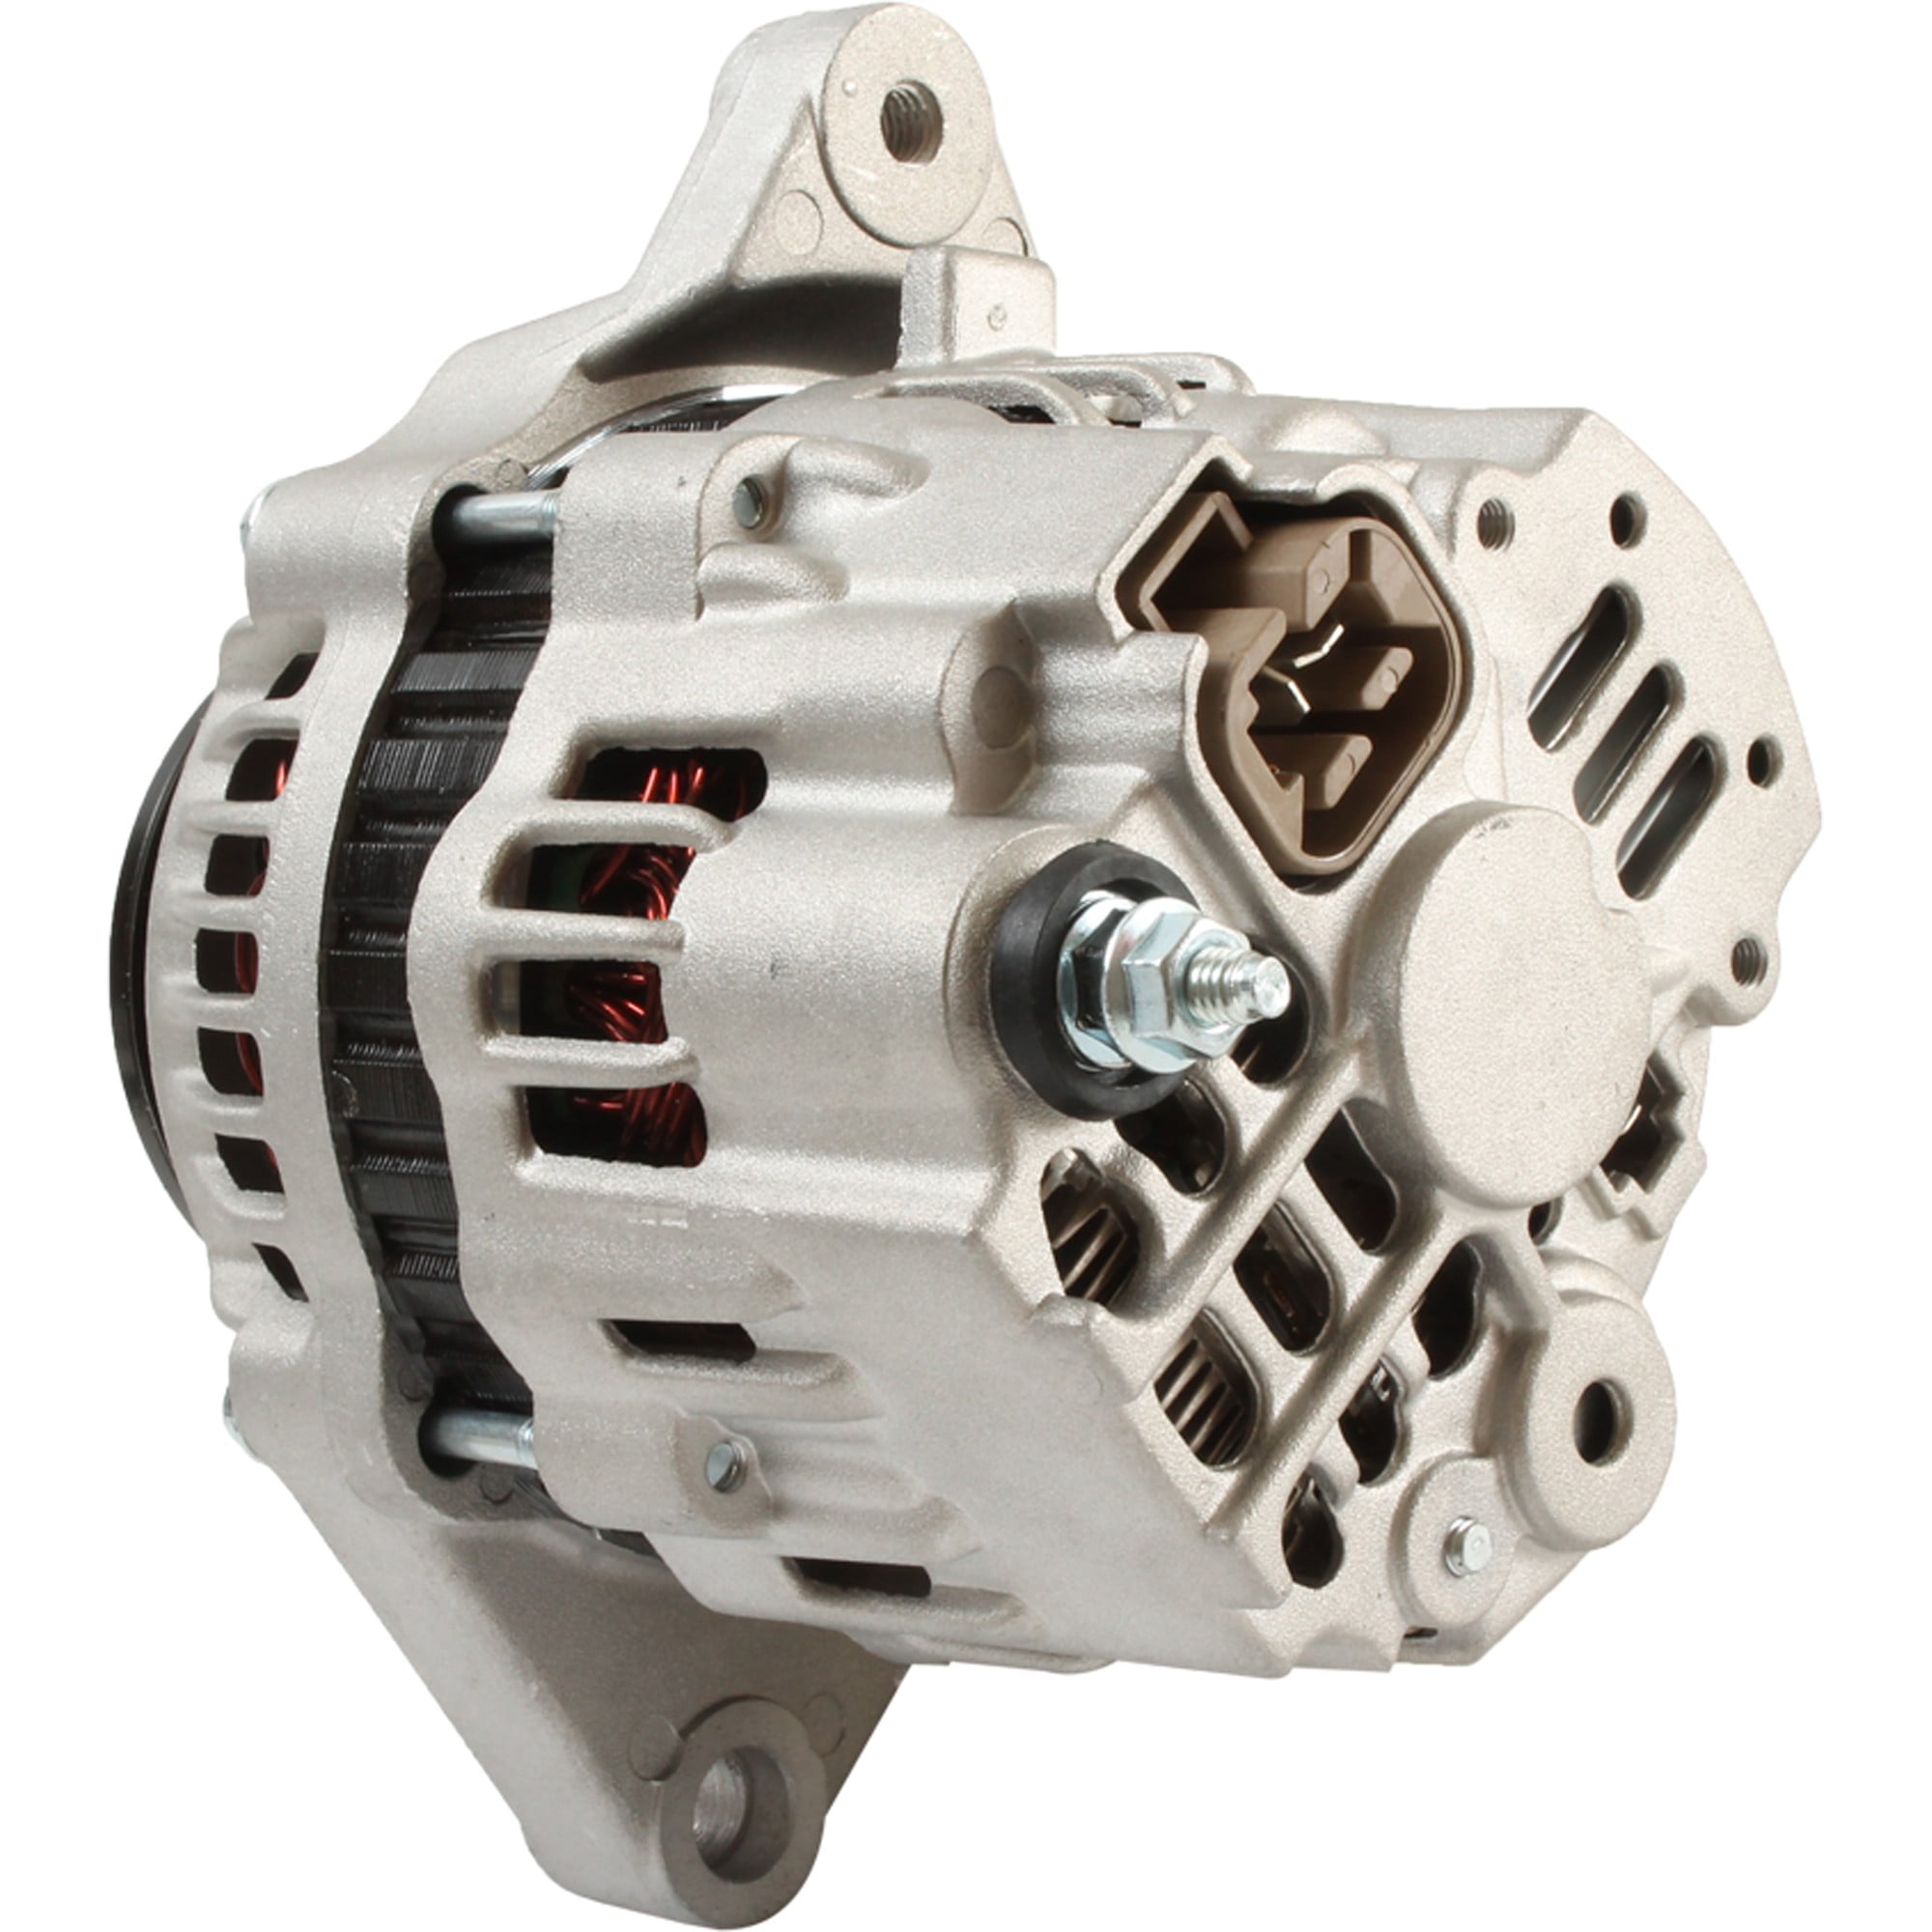 Alternator NEW replaces 32A68-00300 32A68-00302 A7T02077 A7T02077C 12562 